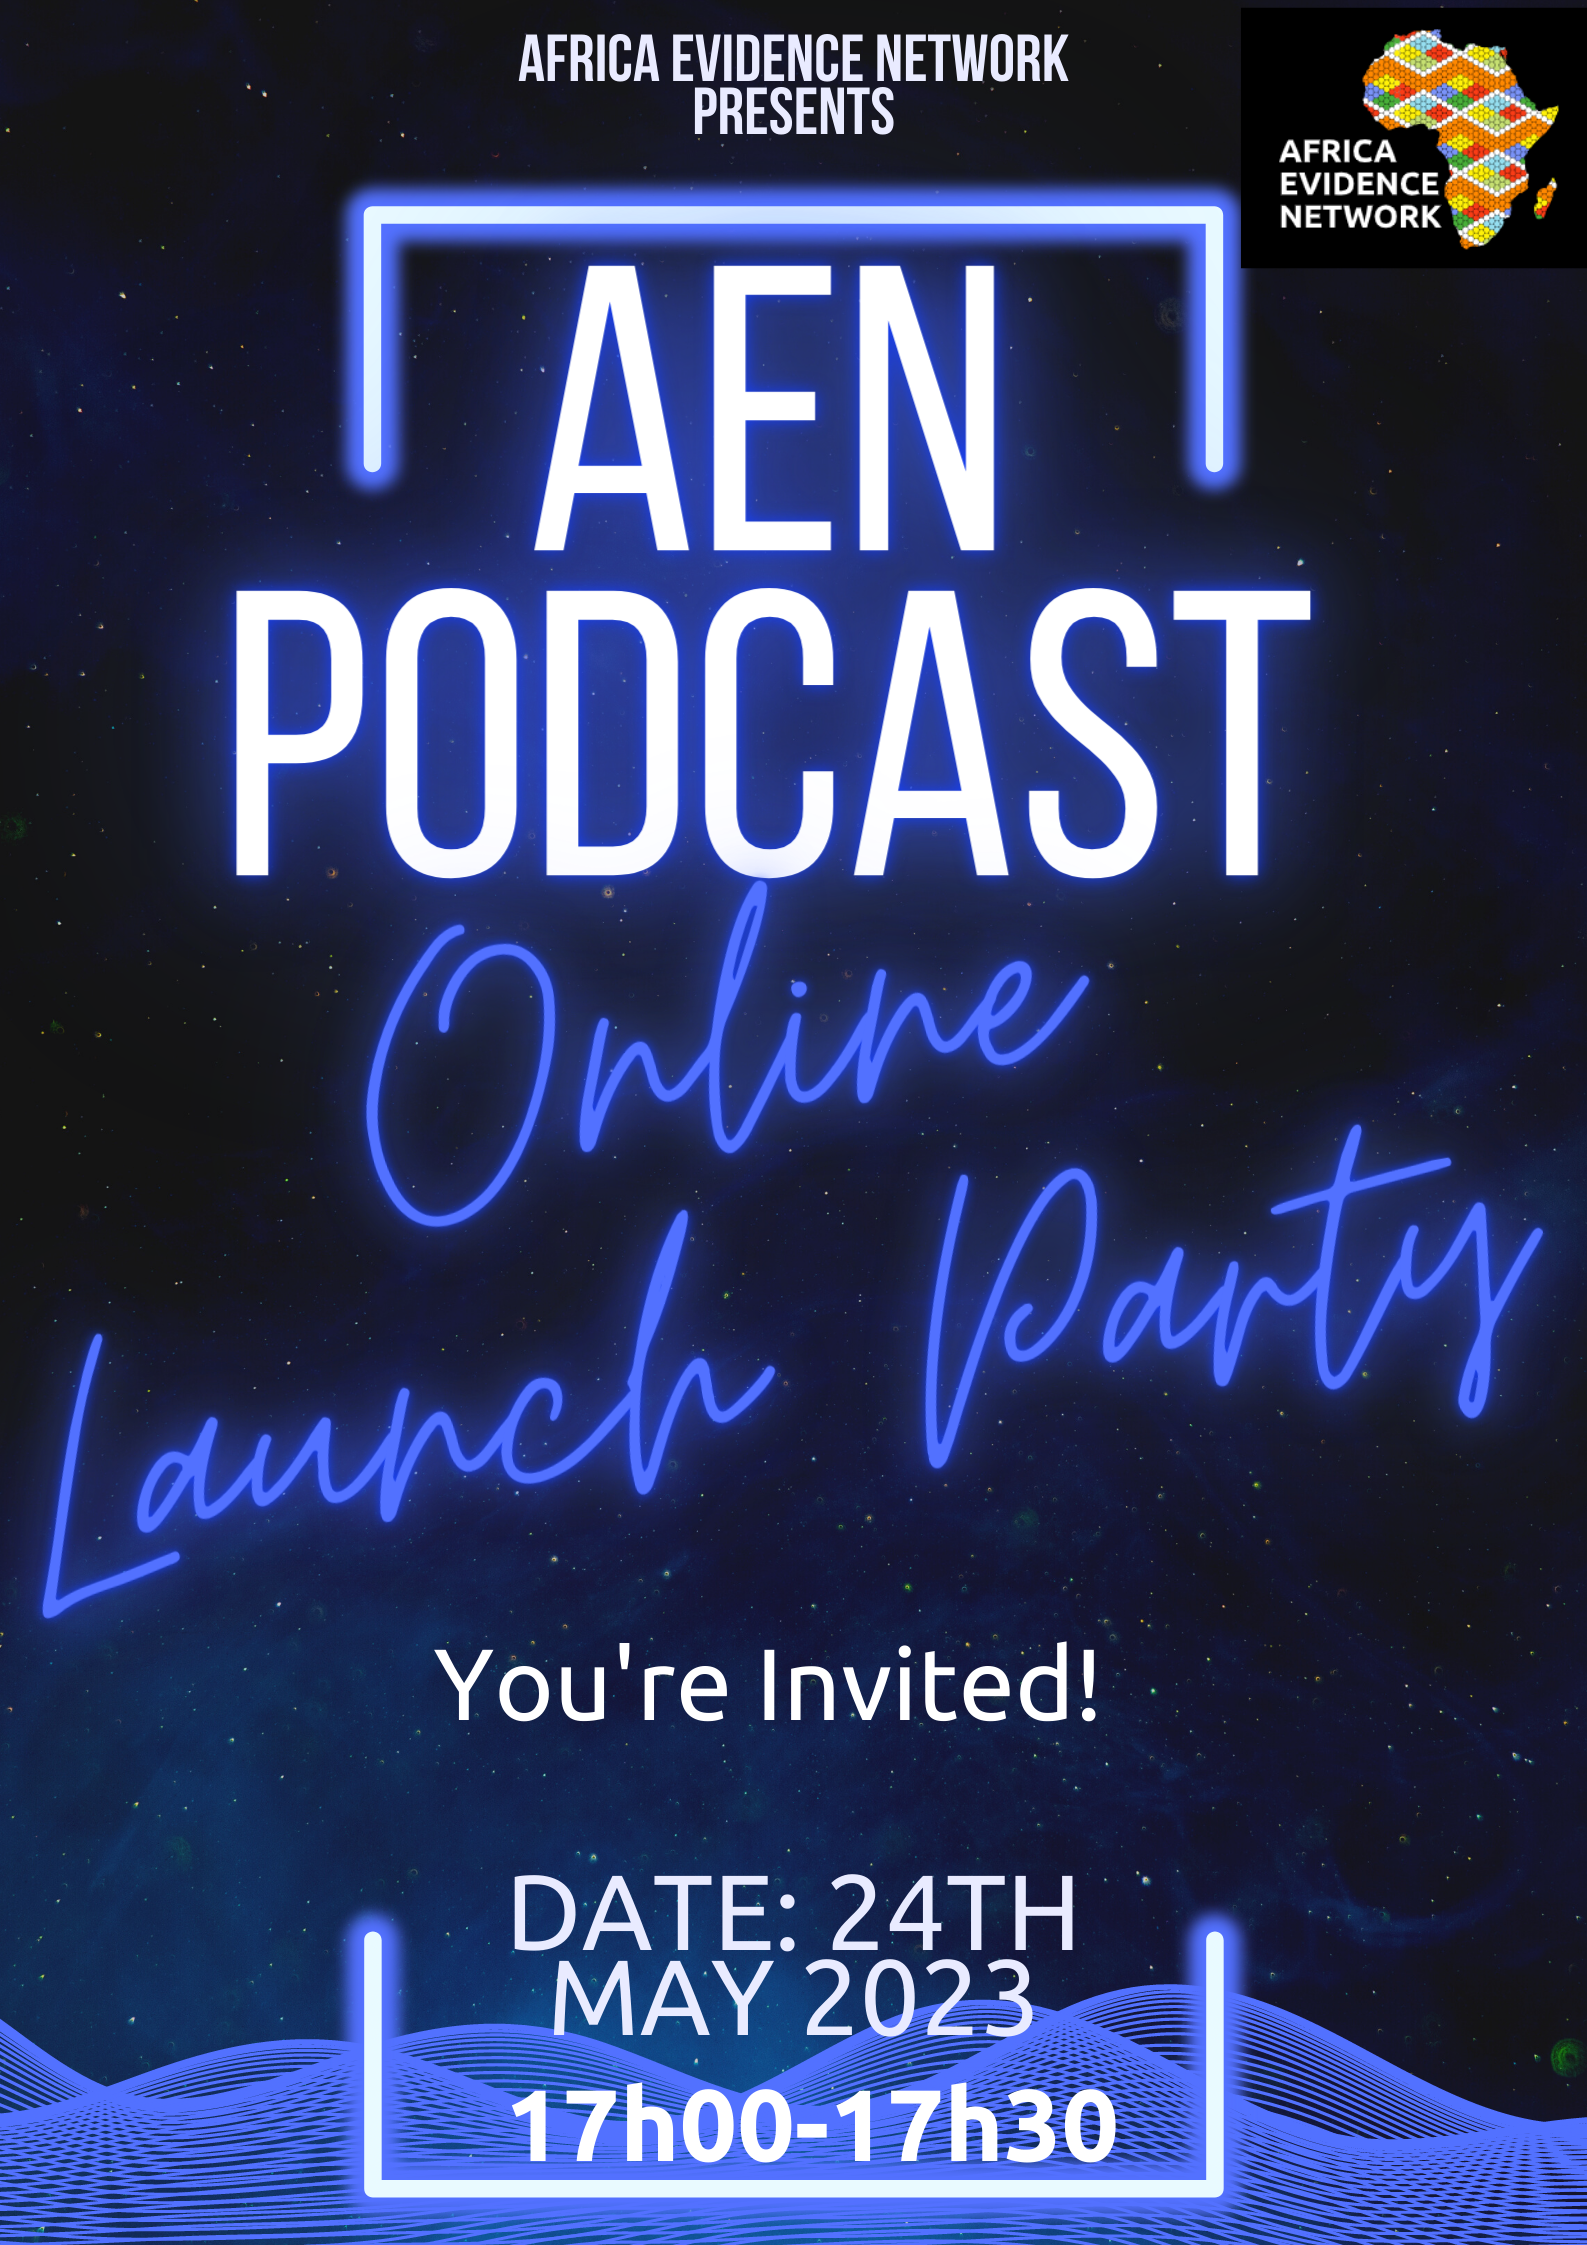 Africa Evidence Network Podcast Launch Party